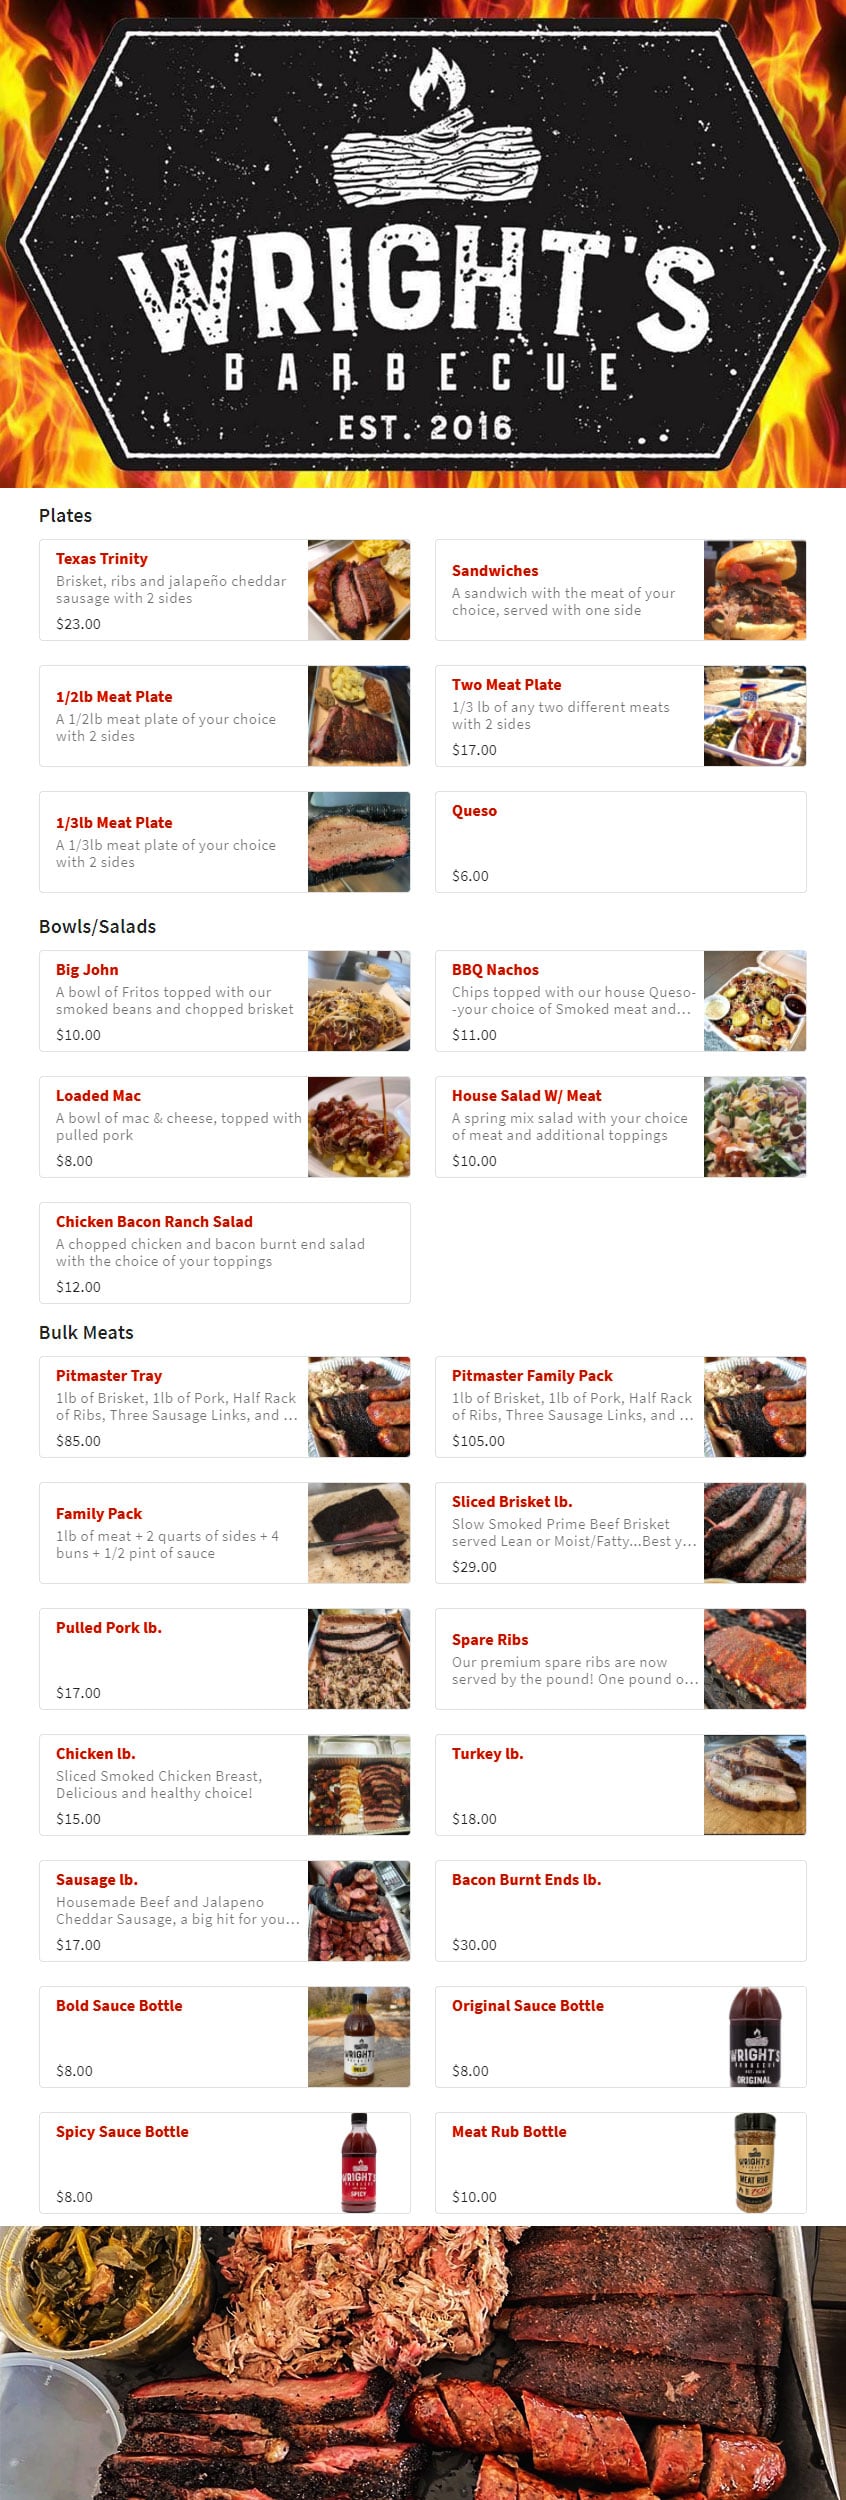 Wright's Barbecue Online Menu